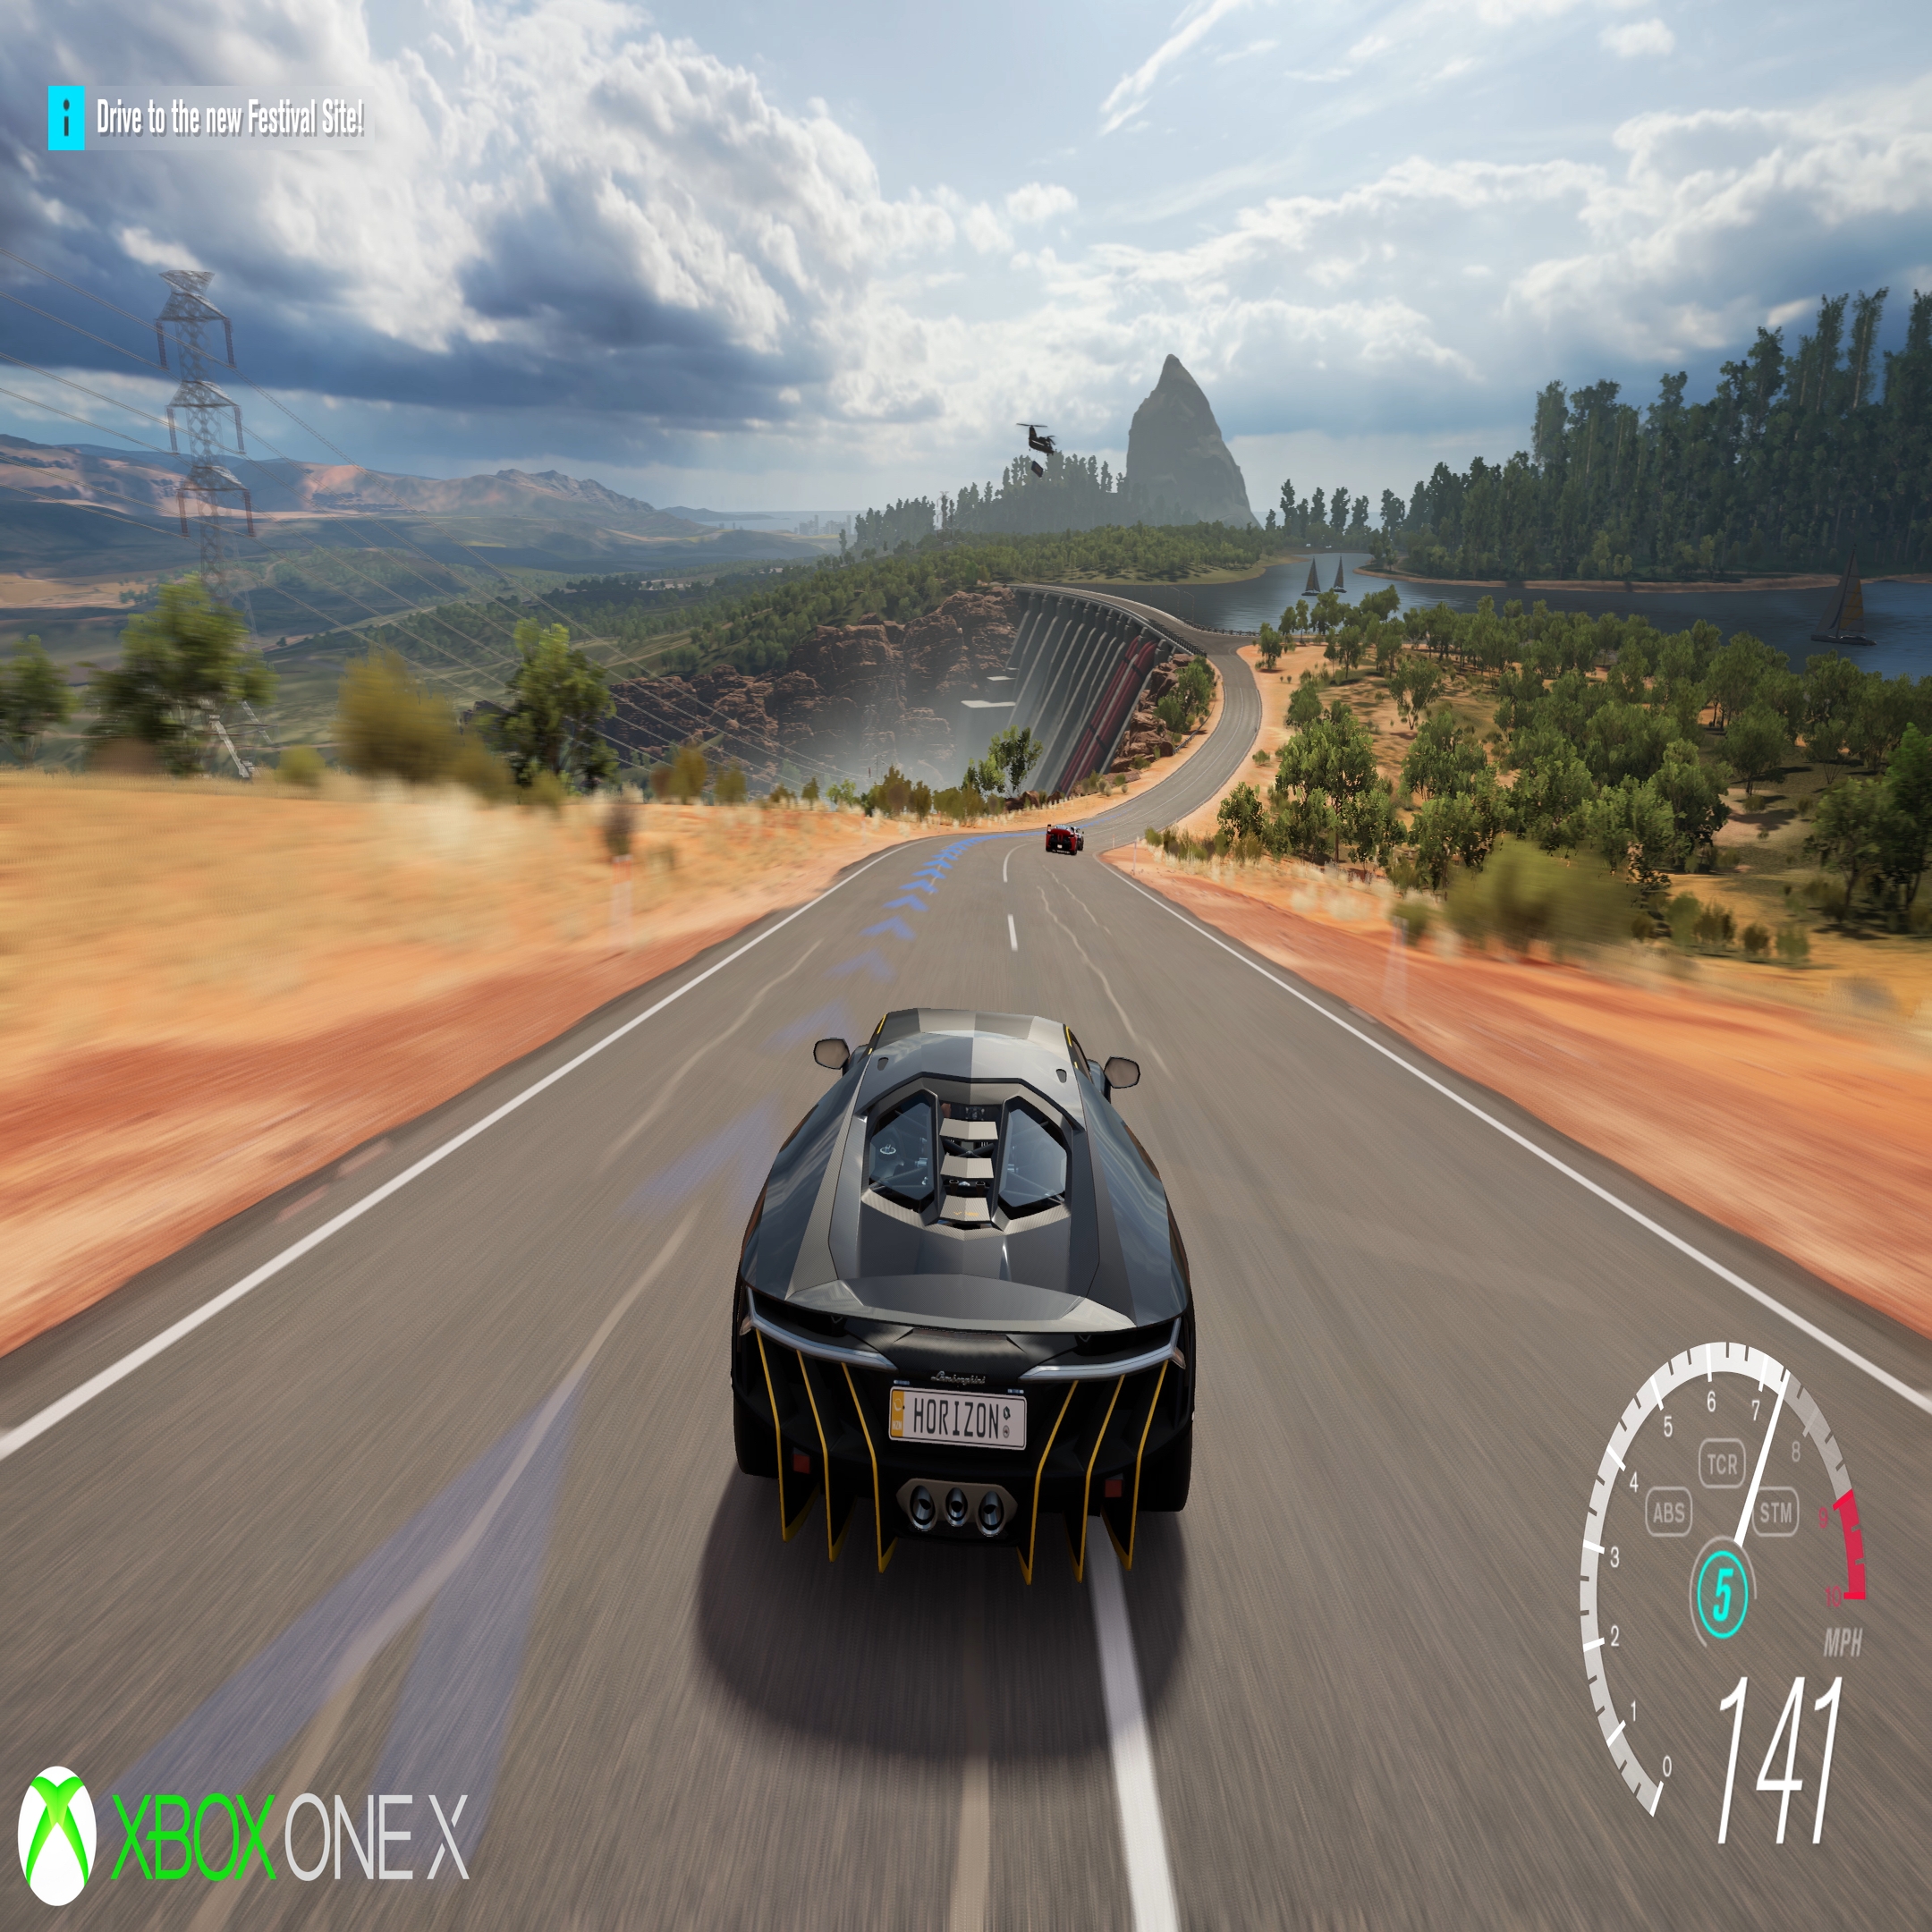 Forza Horizon 3's Xbox One X update is a true showcase for console